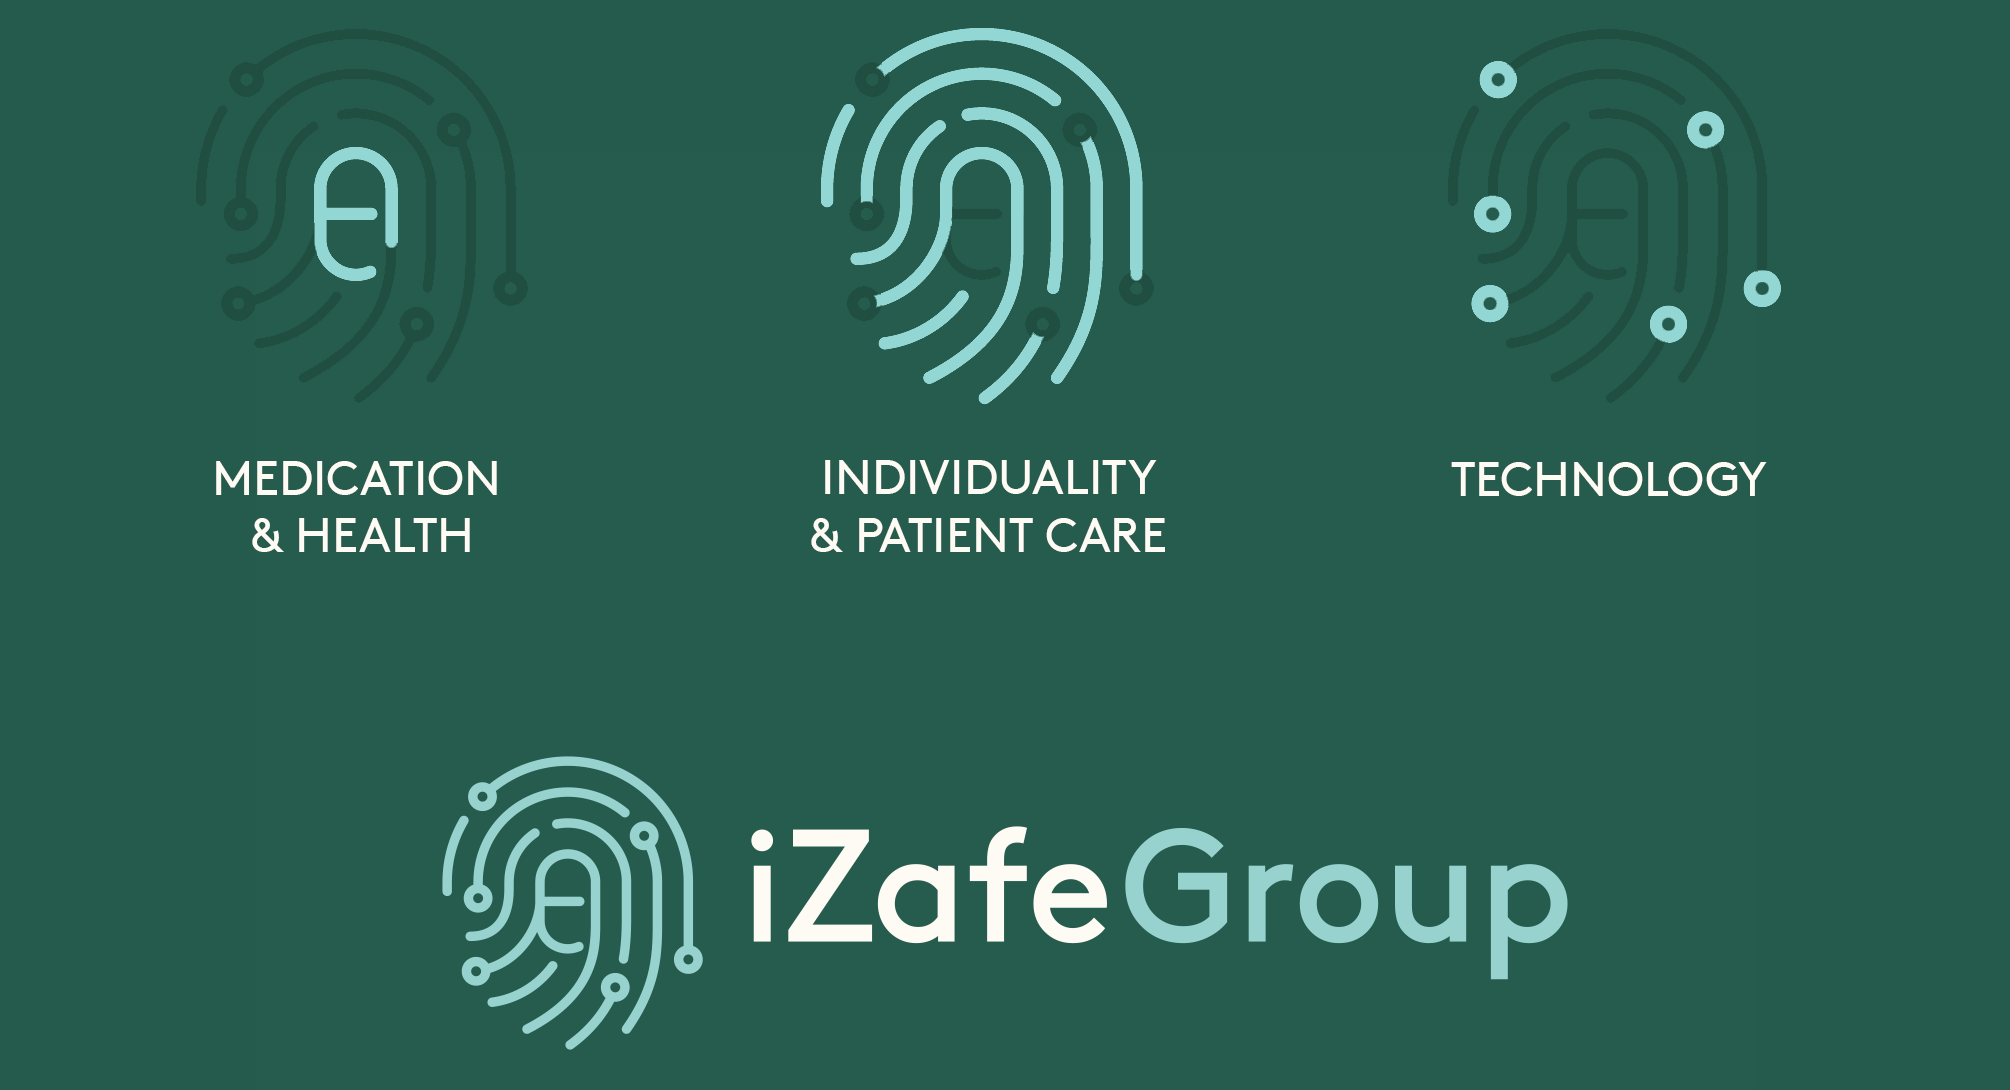 iZafe Group’s new identity is launched to clarify the company’s vision